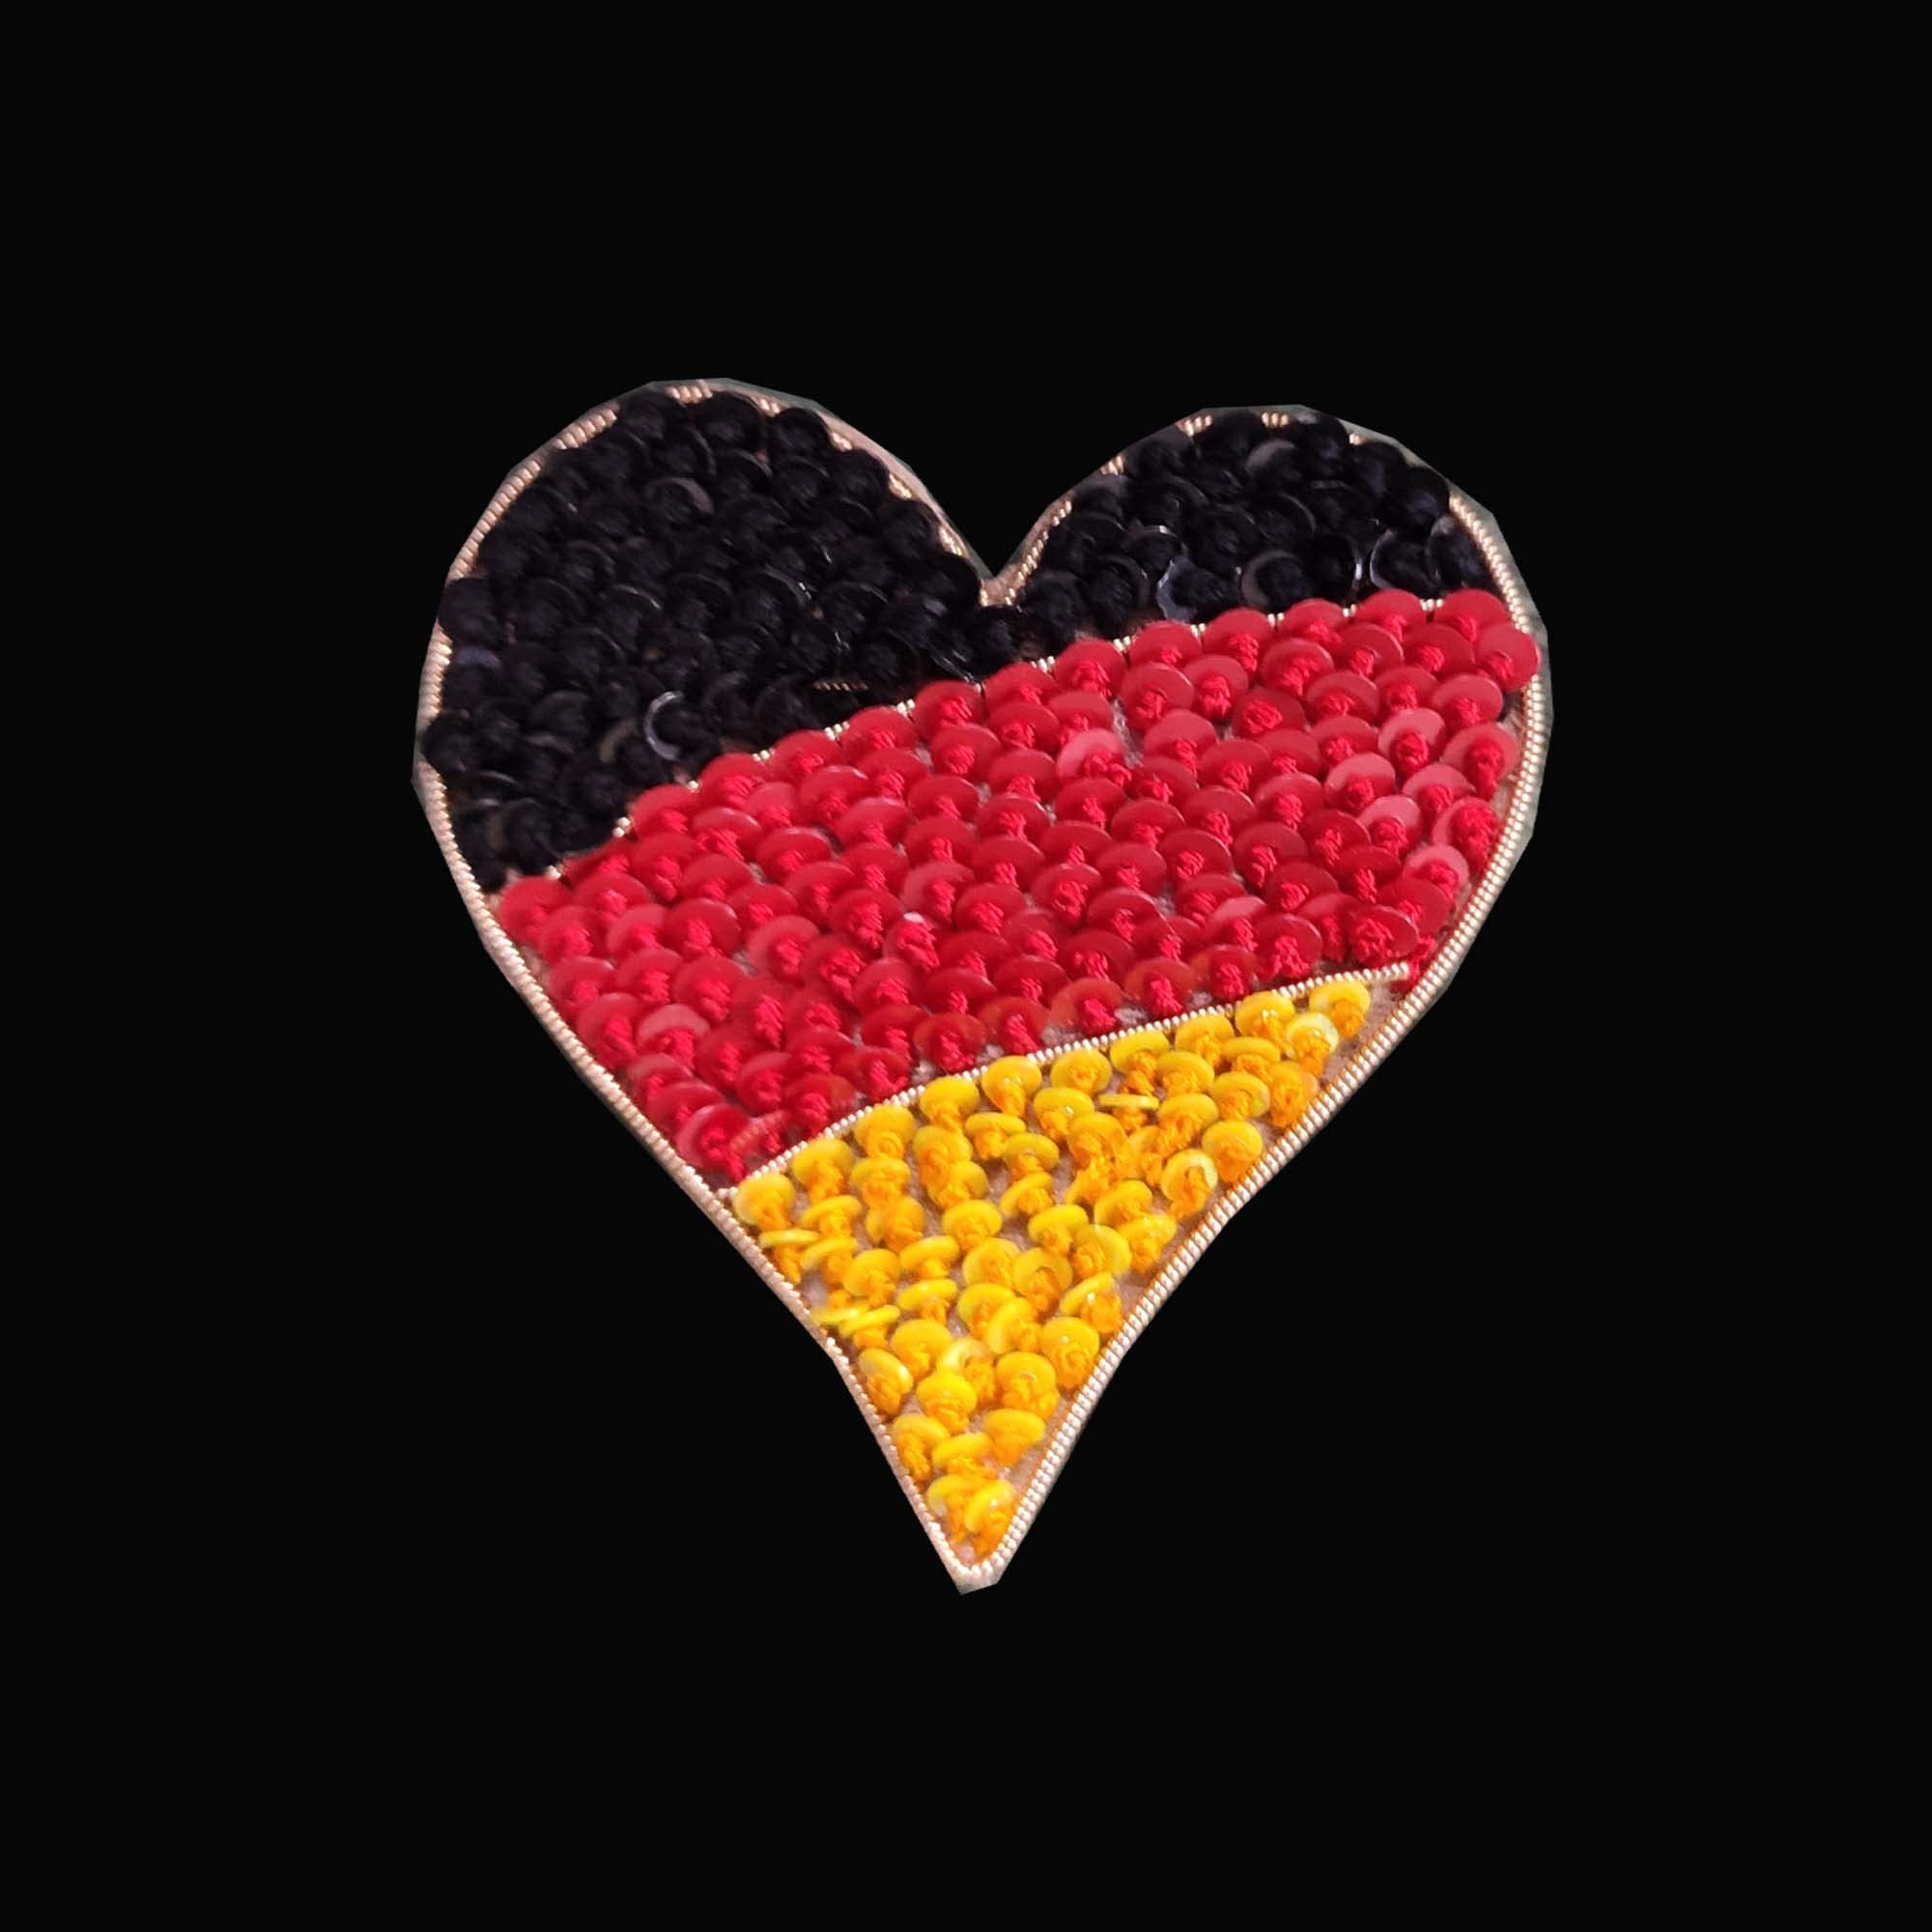 Germany Flag Embroidered Patch sew on Emblem Set of -- 2 pcs Made My Hand Embroidery Work